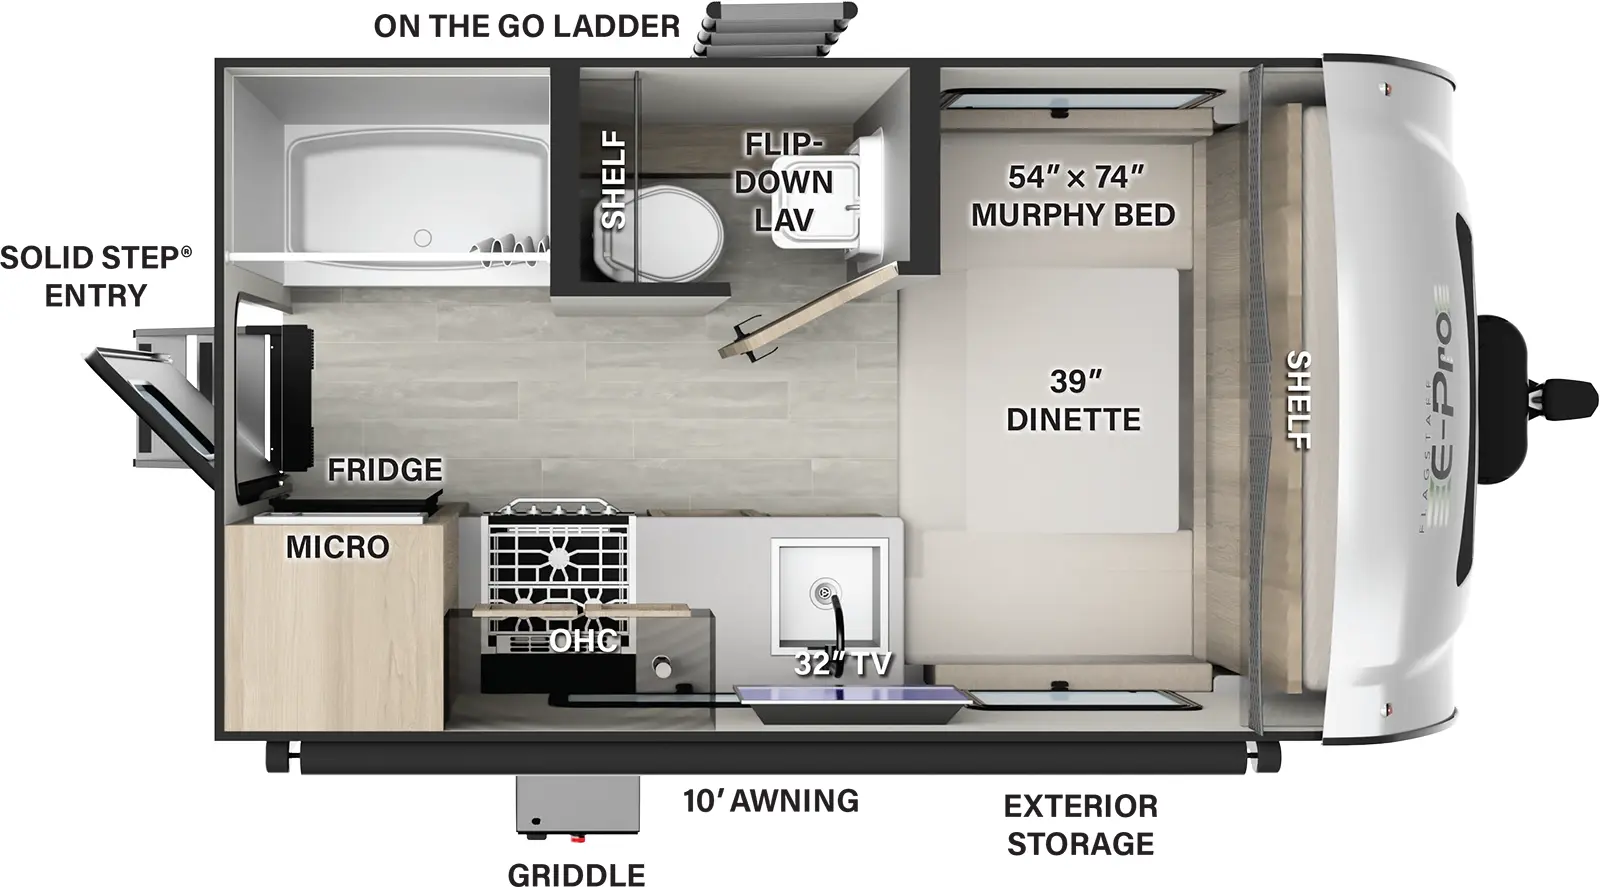 The E15FD has zero slideouts and one entry. Exterior features a 10 foot awning, griddle, exterior storage, off-door side on the go ladder, and rear solid step entry. Interior layout front to back: dinette/murphy bed with shelf above; off-door side room with toilet, shelf and flip-down lavatory only, and a rear shower; door side kitchen counter with sink, TV above, overhead cabinet, cooktop, microwave, and refrigerator; rear entry.